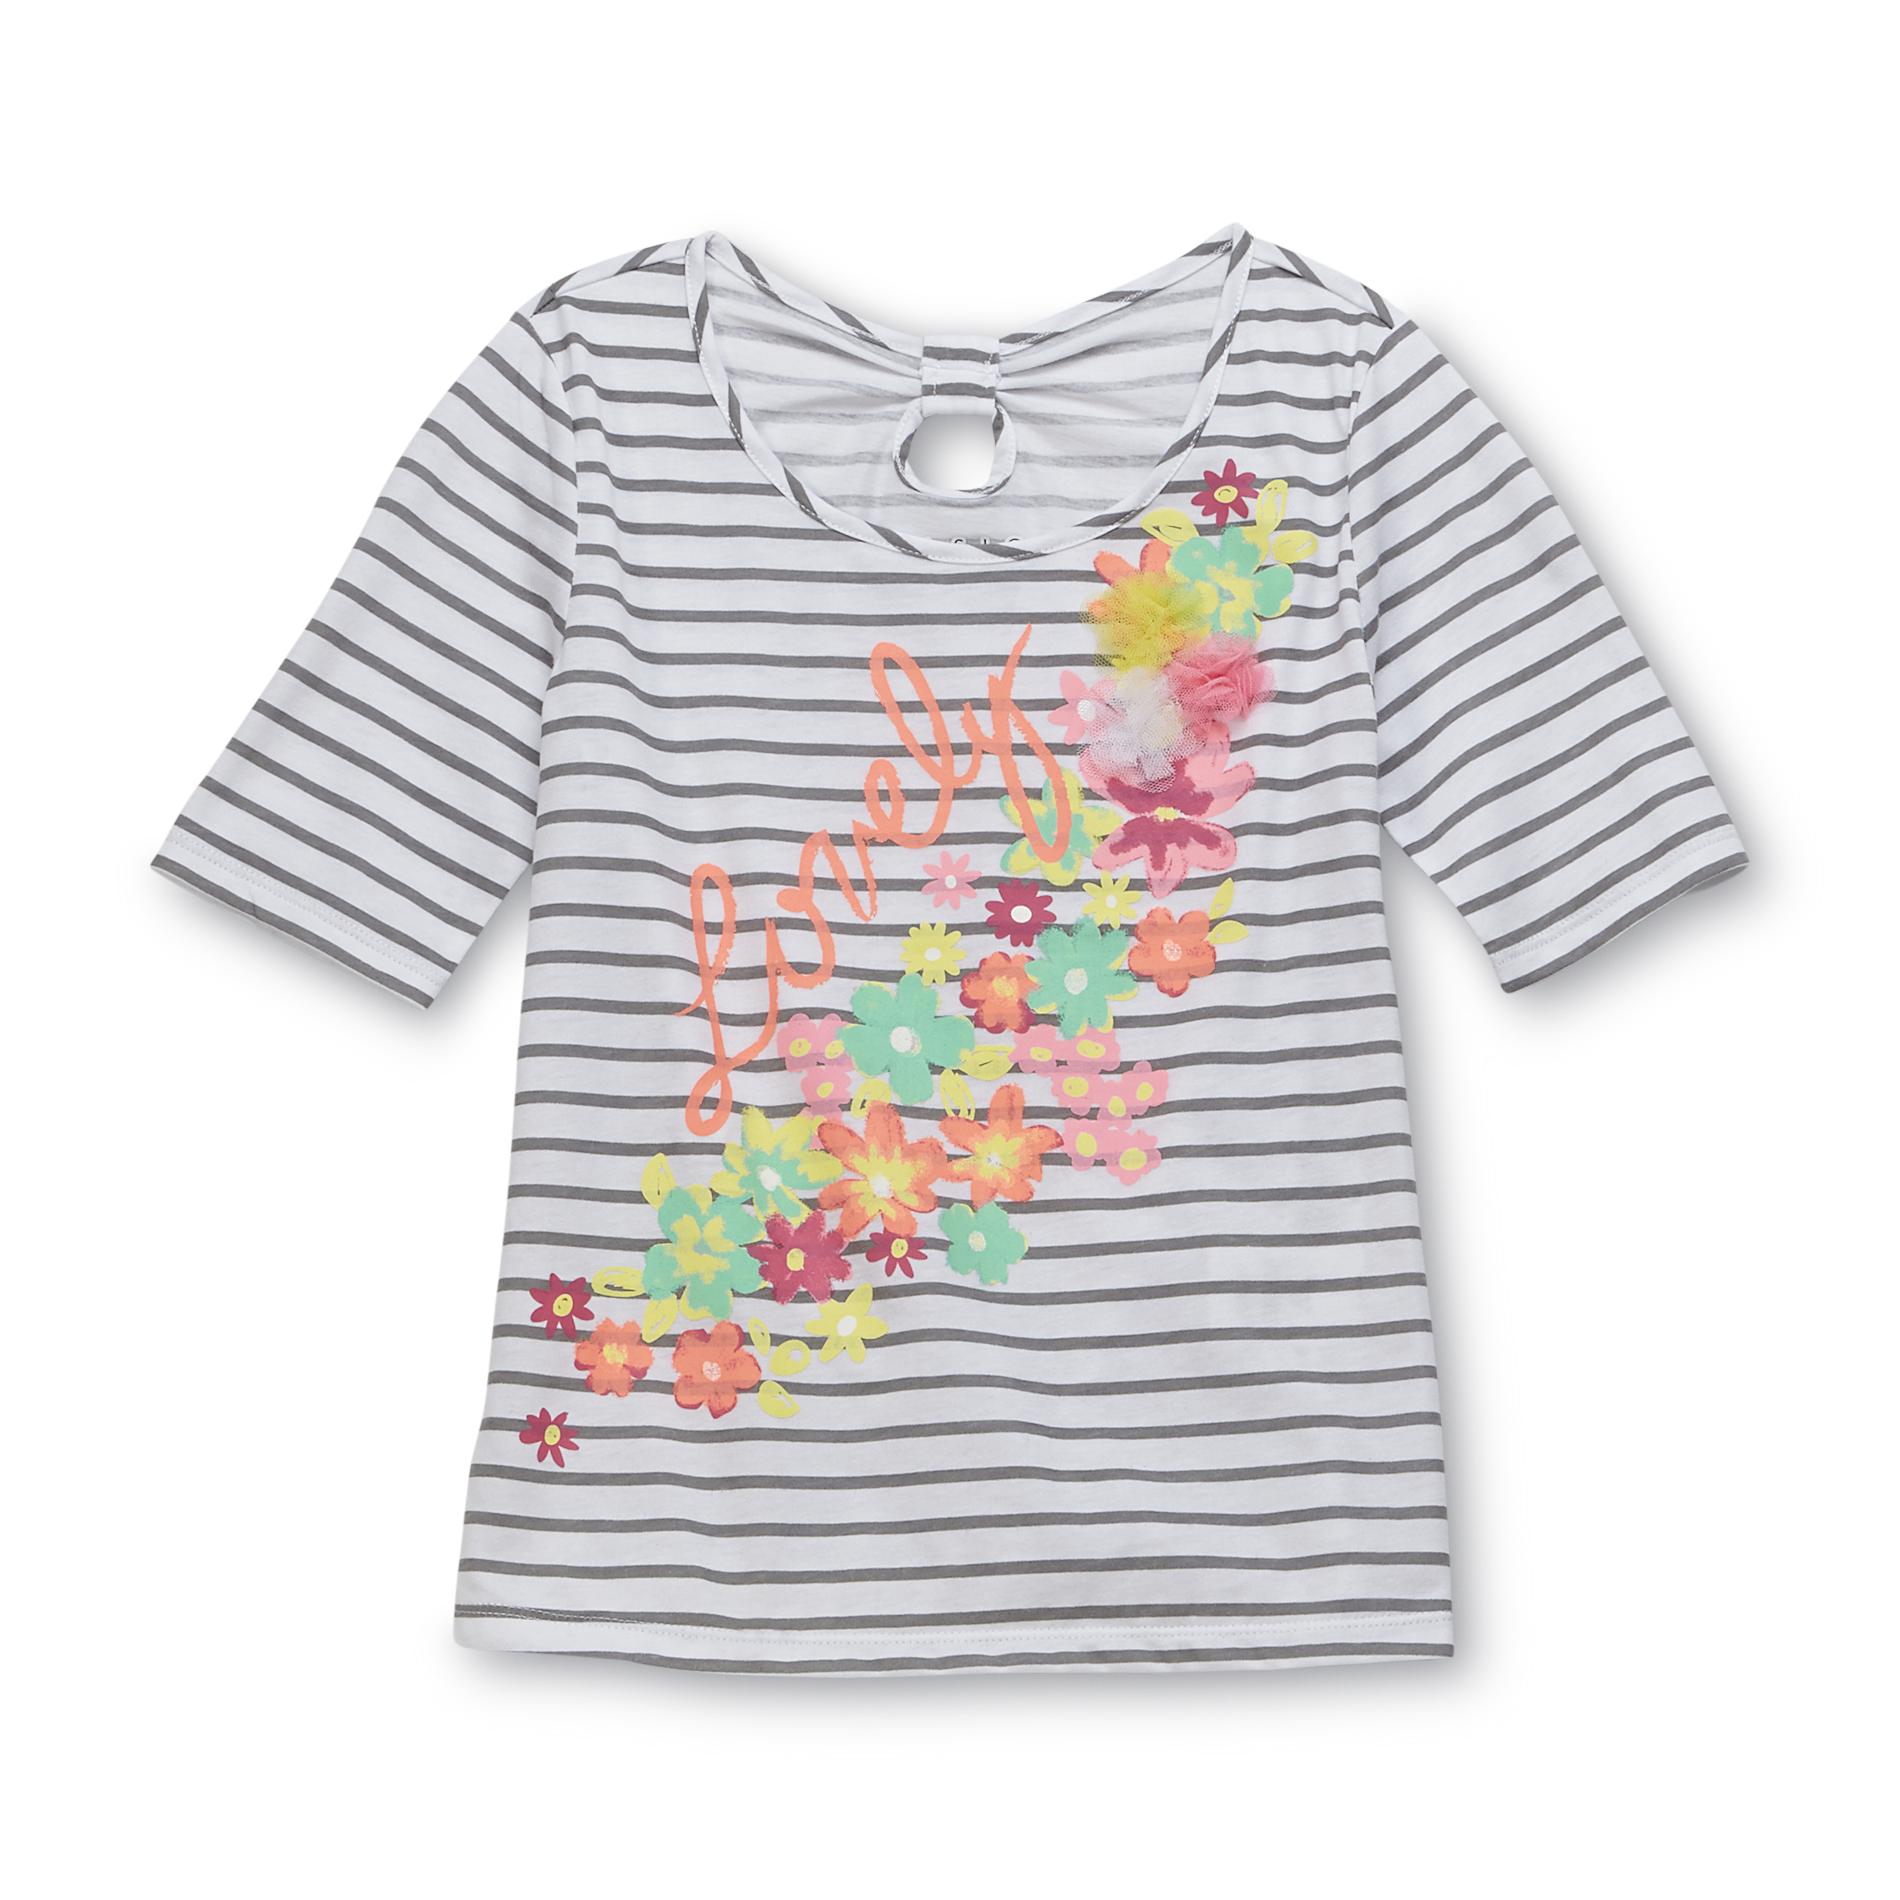 Basic Editions Girl's Keyhole-Back Top - Striped & Floral